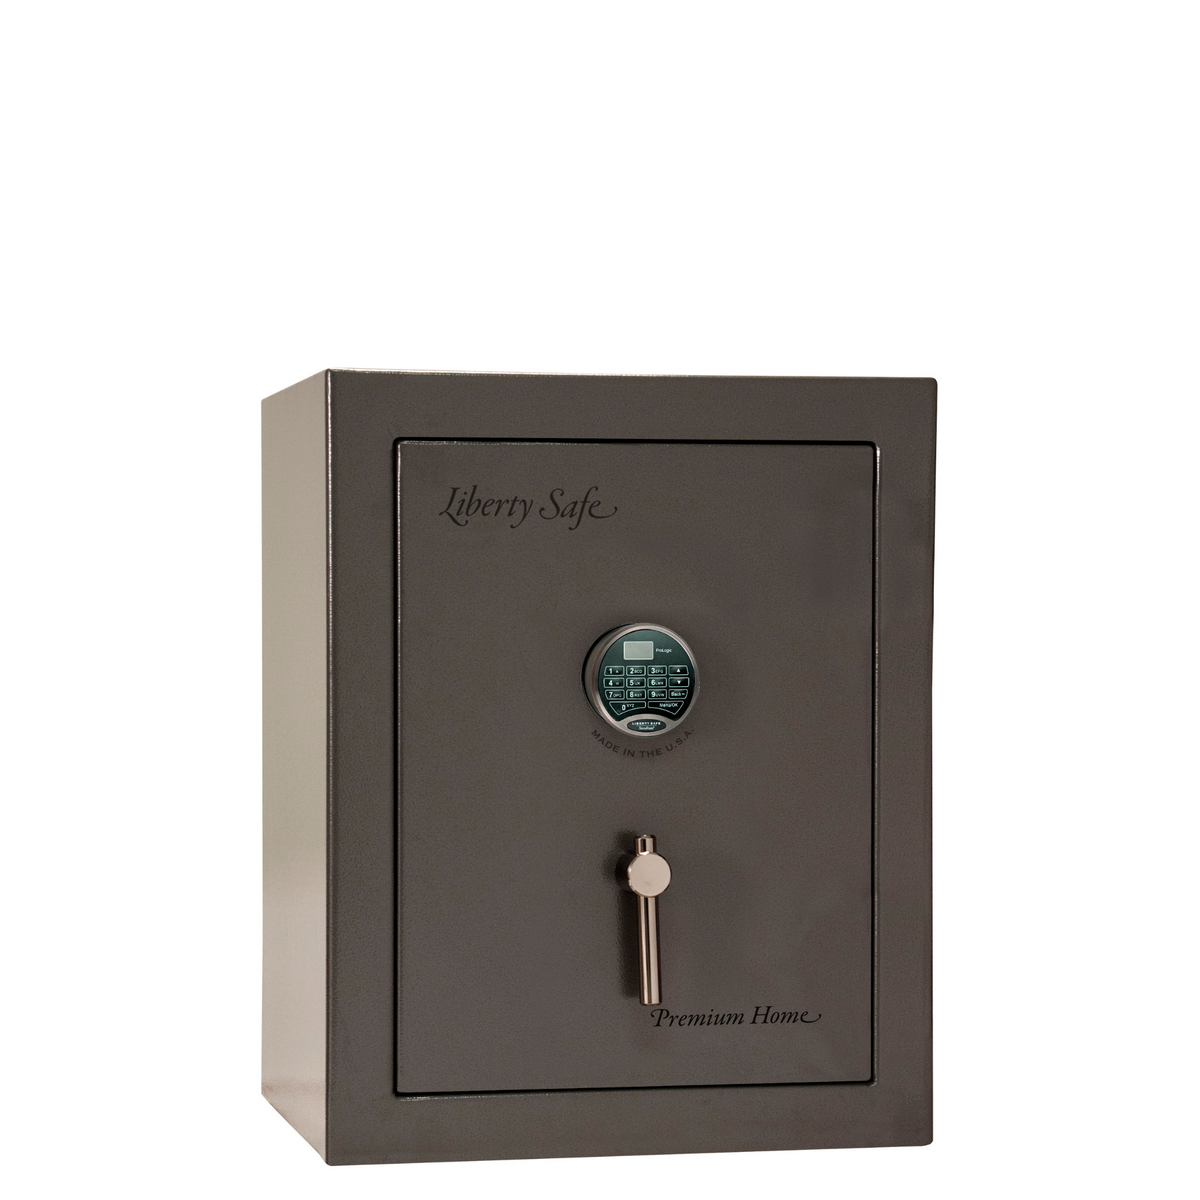 Premium Home Series | Level 7 Security | 2 Hour Fire Protection | 08 | Dimensions: 30&quot;(H) x 24&quot;(W) x 20.25&quot;(D) | Gray Marble - Closed Door